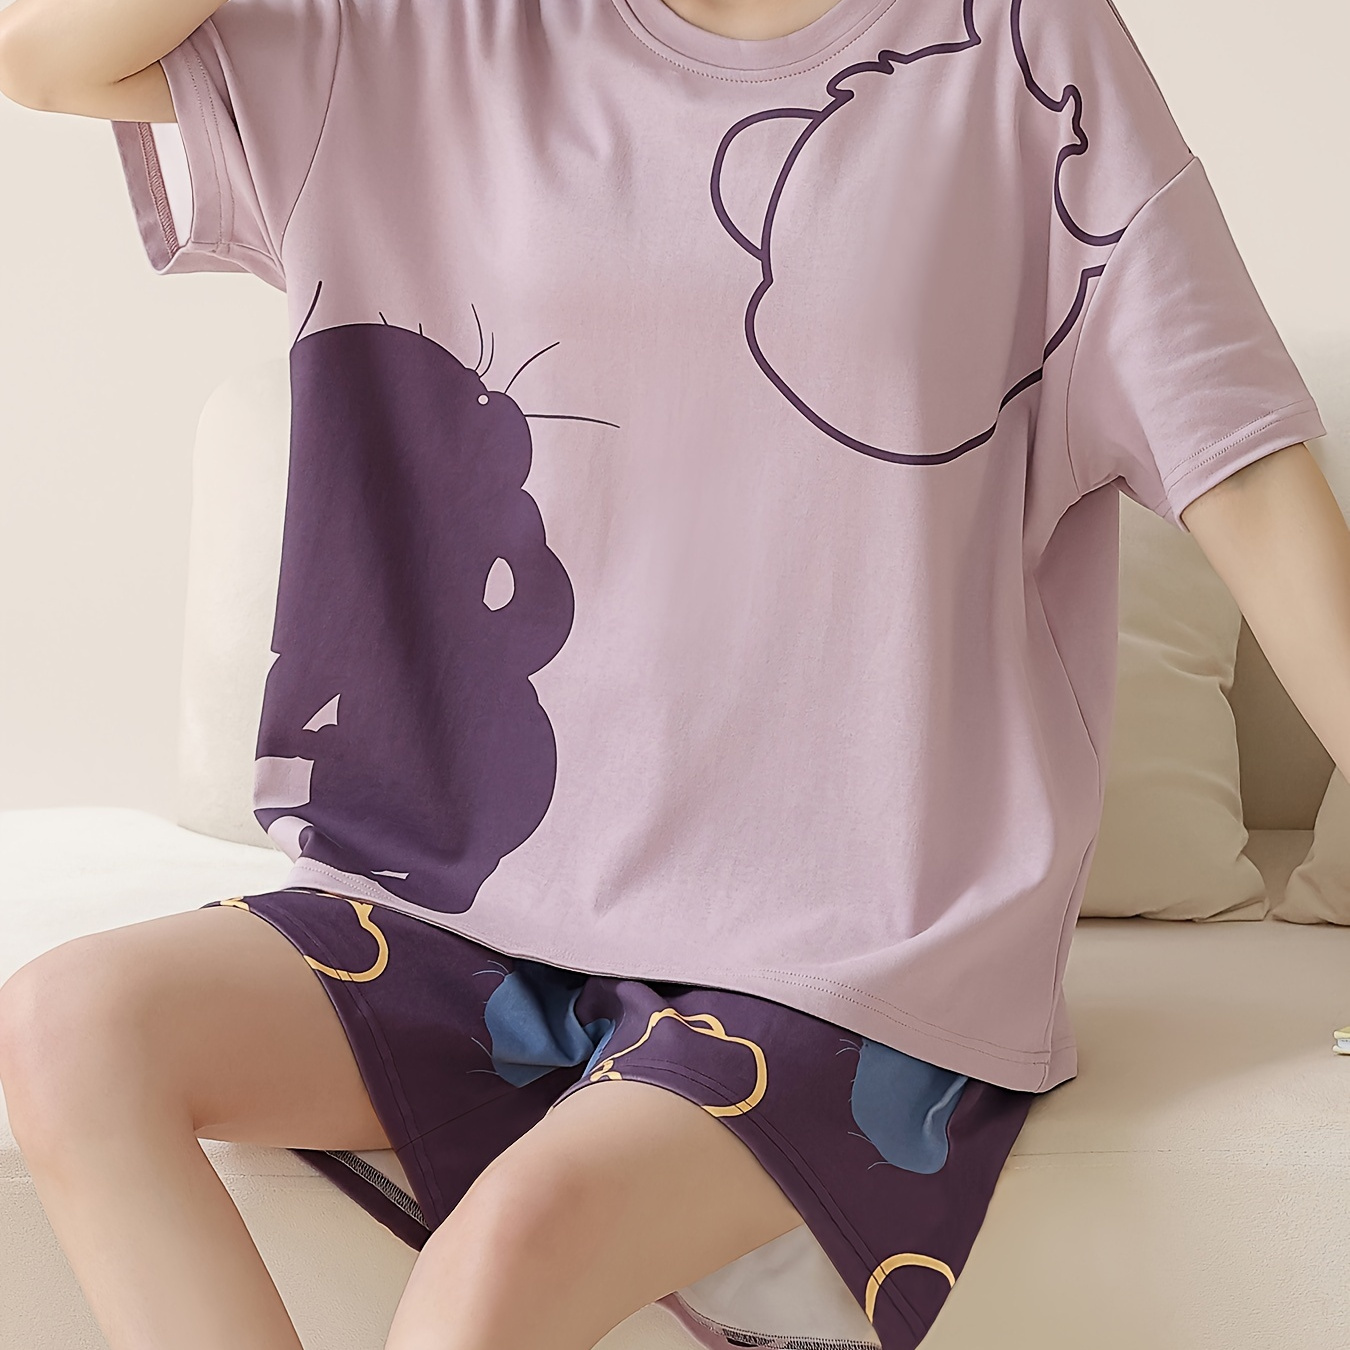 

Women's Cute Cartoon Print Loose Fit Pajama Set, Short Sleeve Round Neck Top & Shorts, Comfortable Relaxed Fit